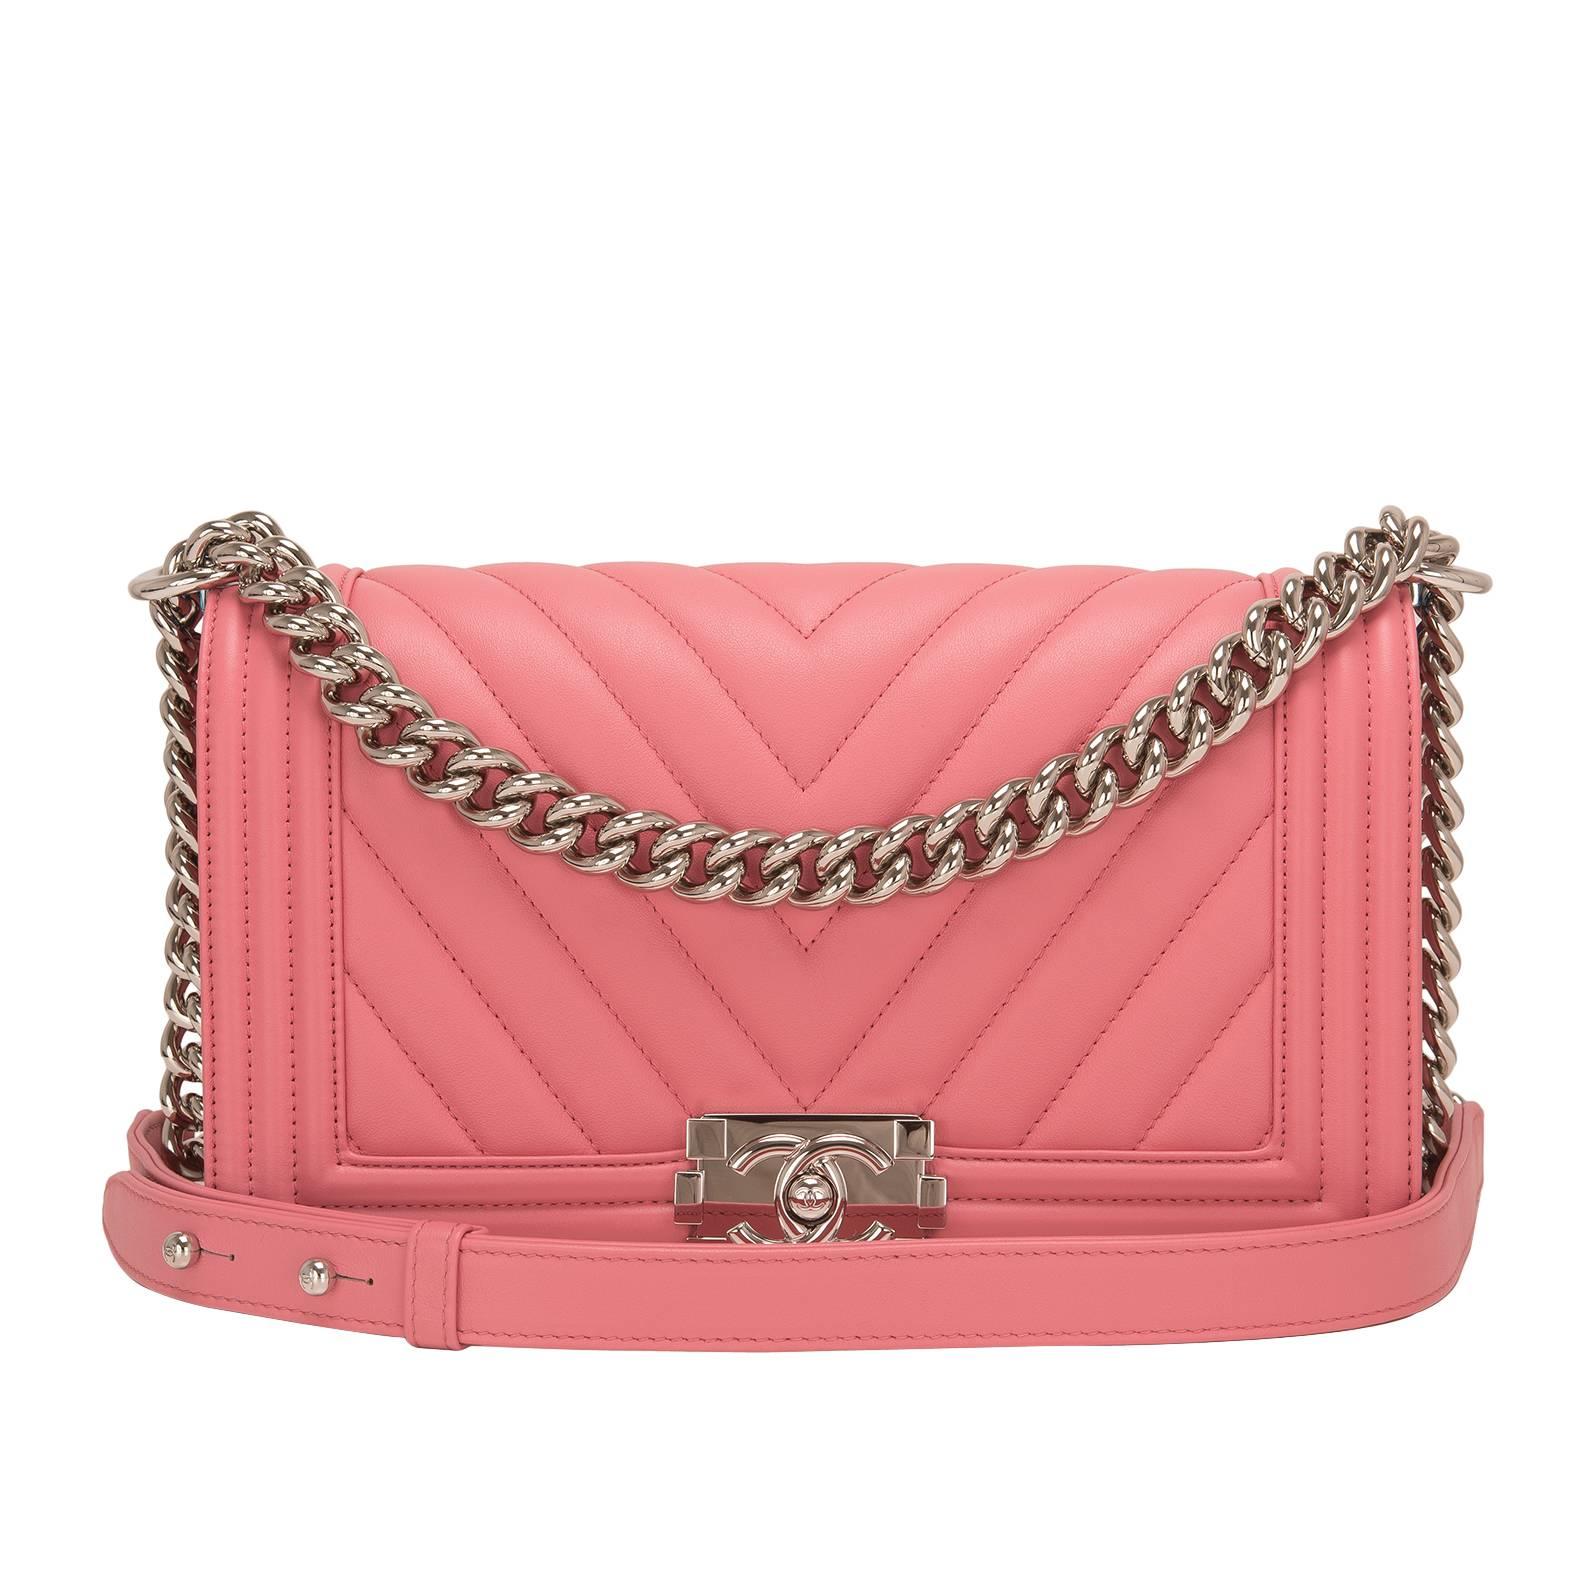 Chanel Pink Chevron Quilted Lambskin Medium Boy Bag For Sale